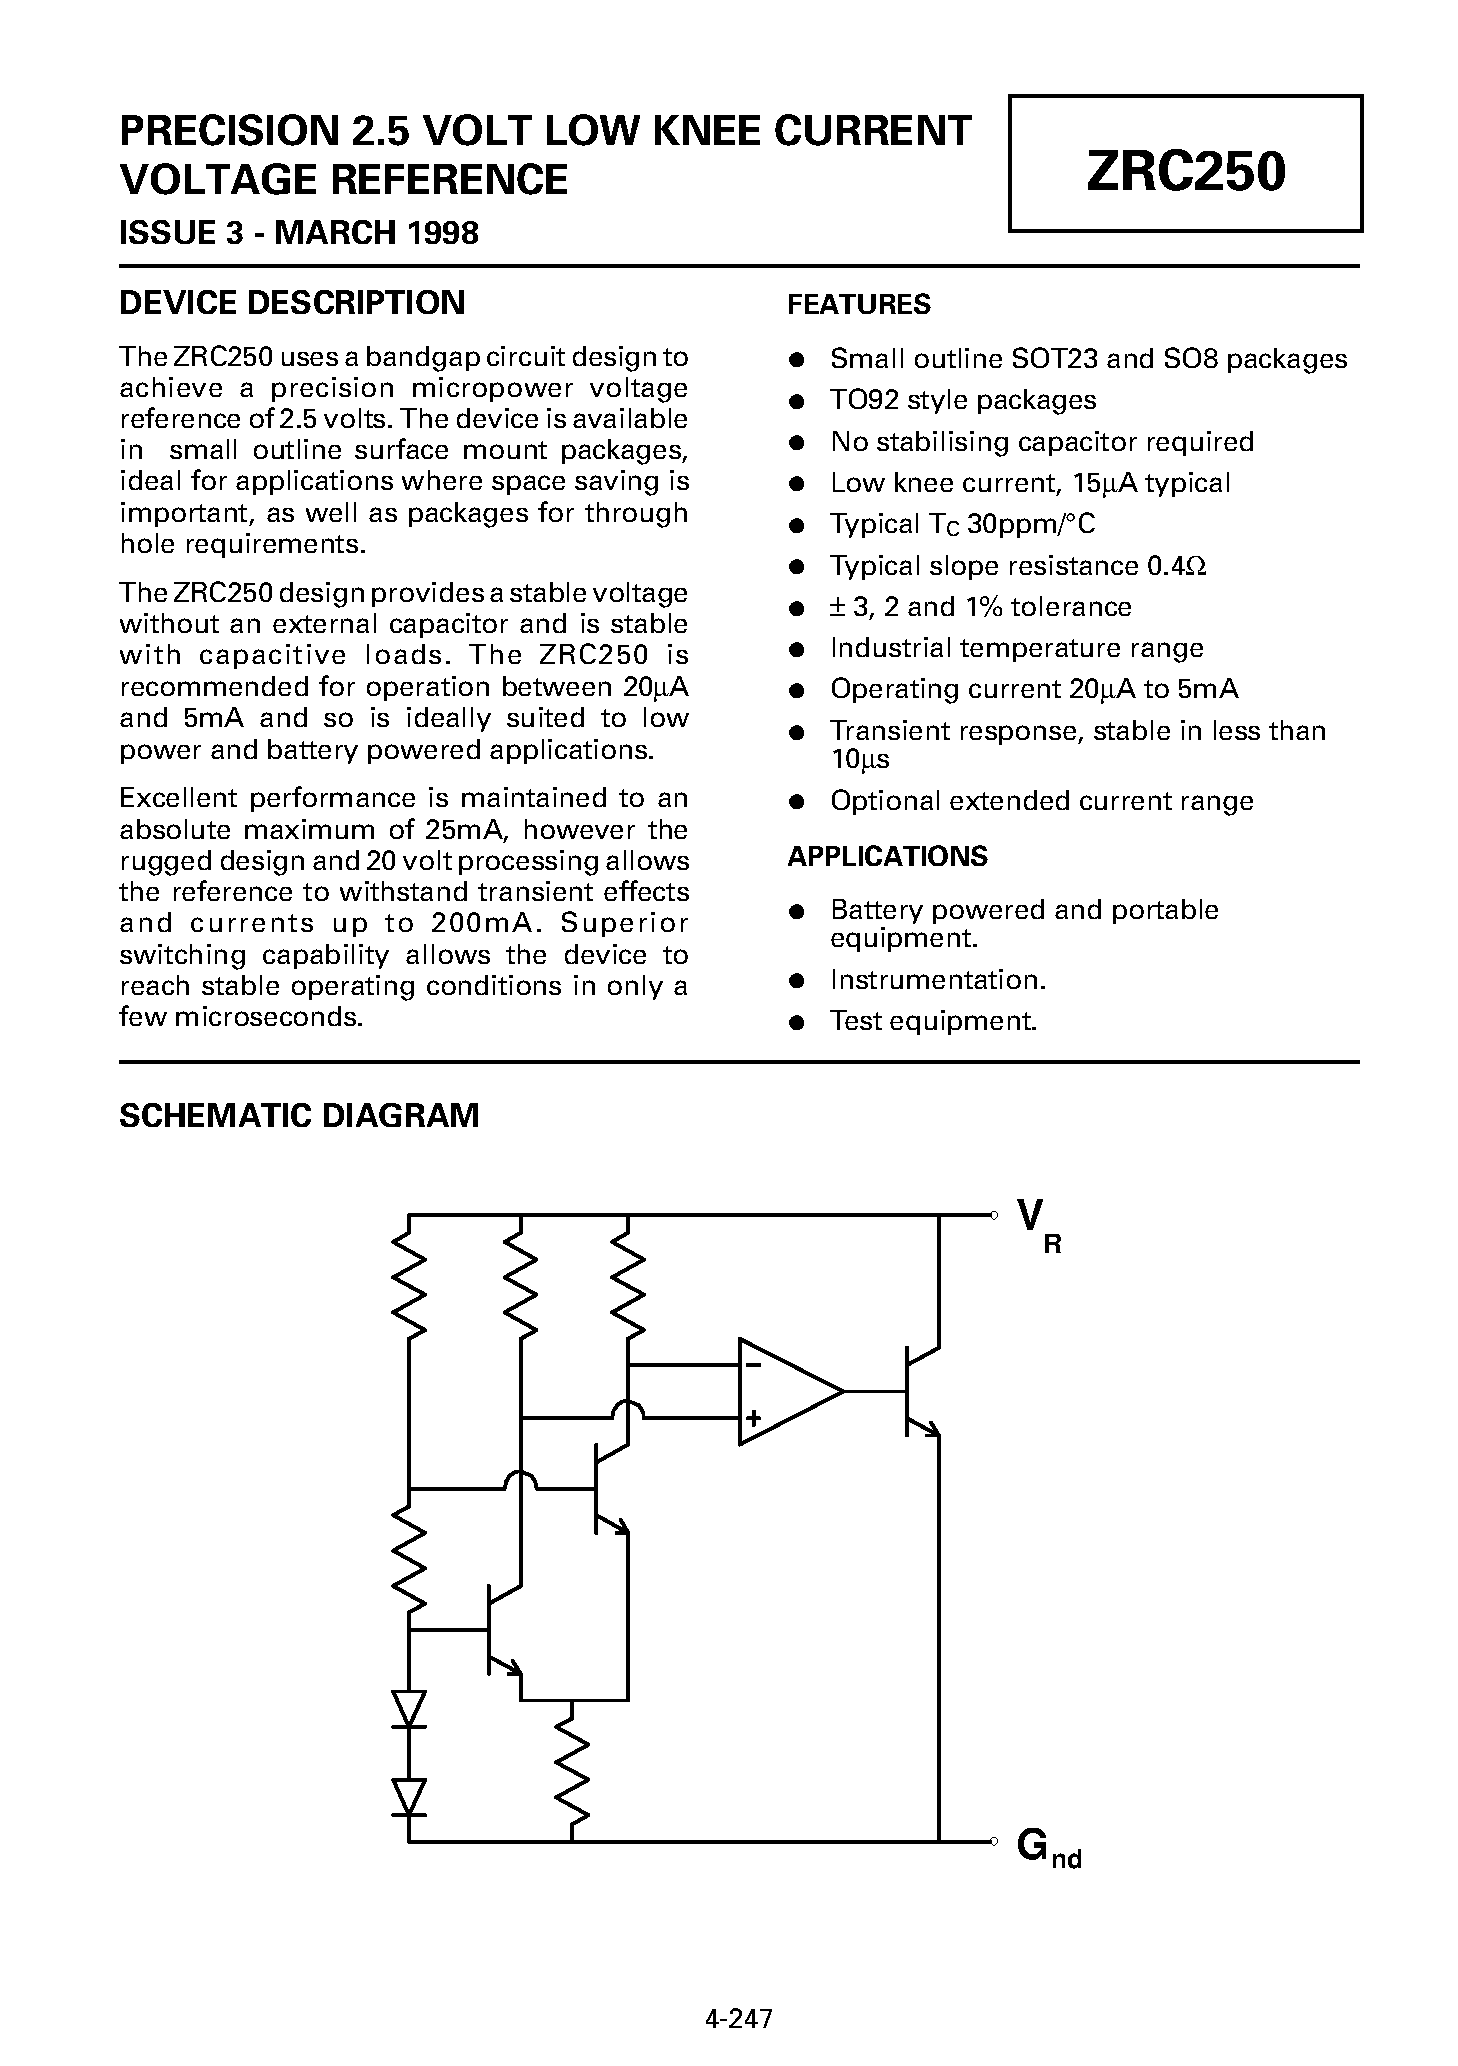 Datasheet ZRC250F01 - PRECISION 2.5 VOLT LOW KNEE CURRENT VOLTAGE REFERENCE page 1